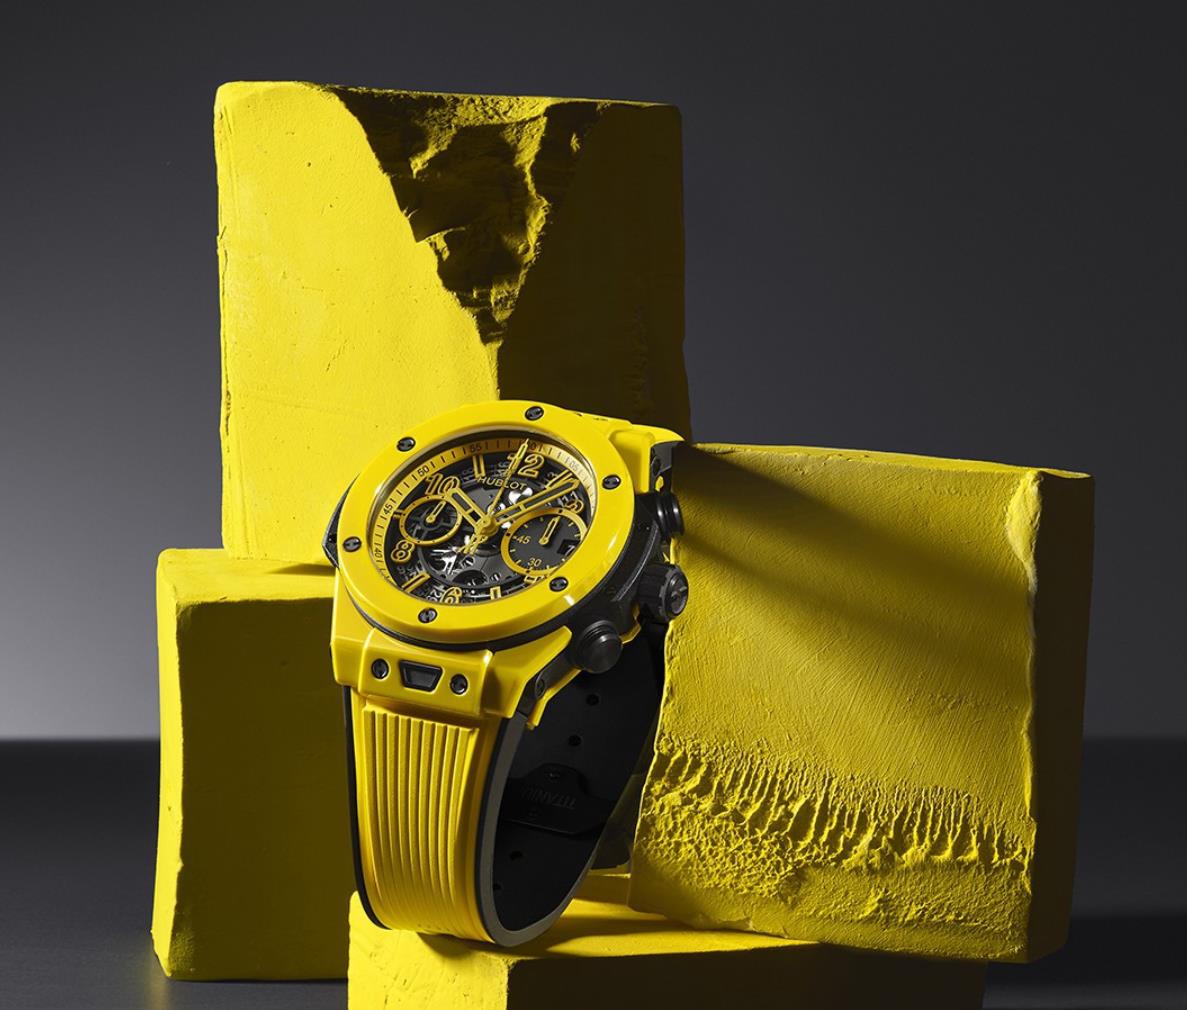 The yellow ceramic fake watch has a hollowed dial.